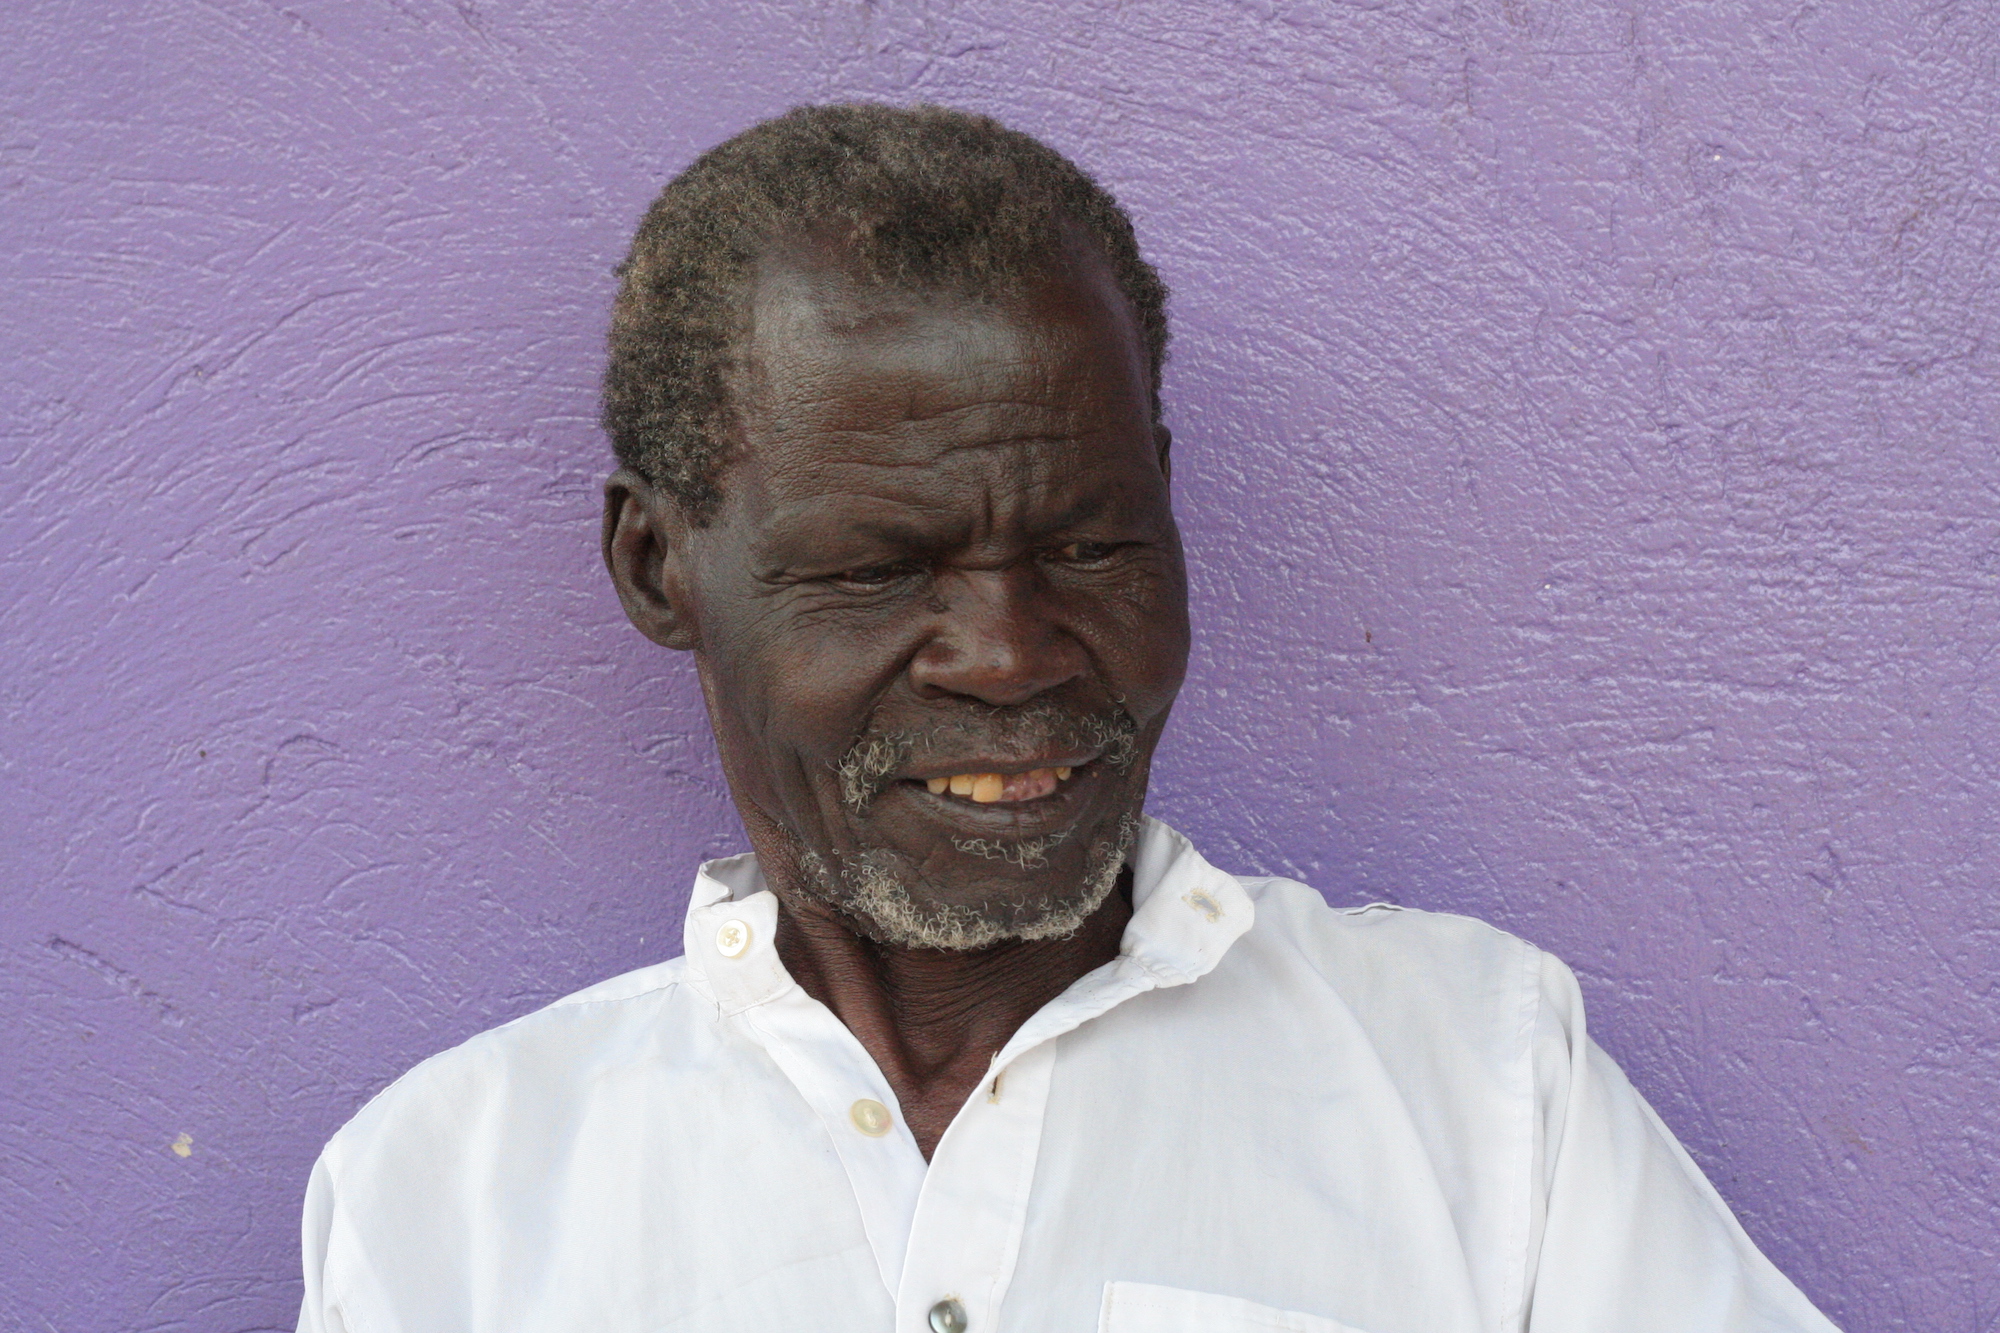 Man in front of a purple wall